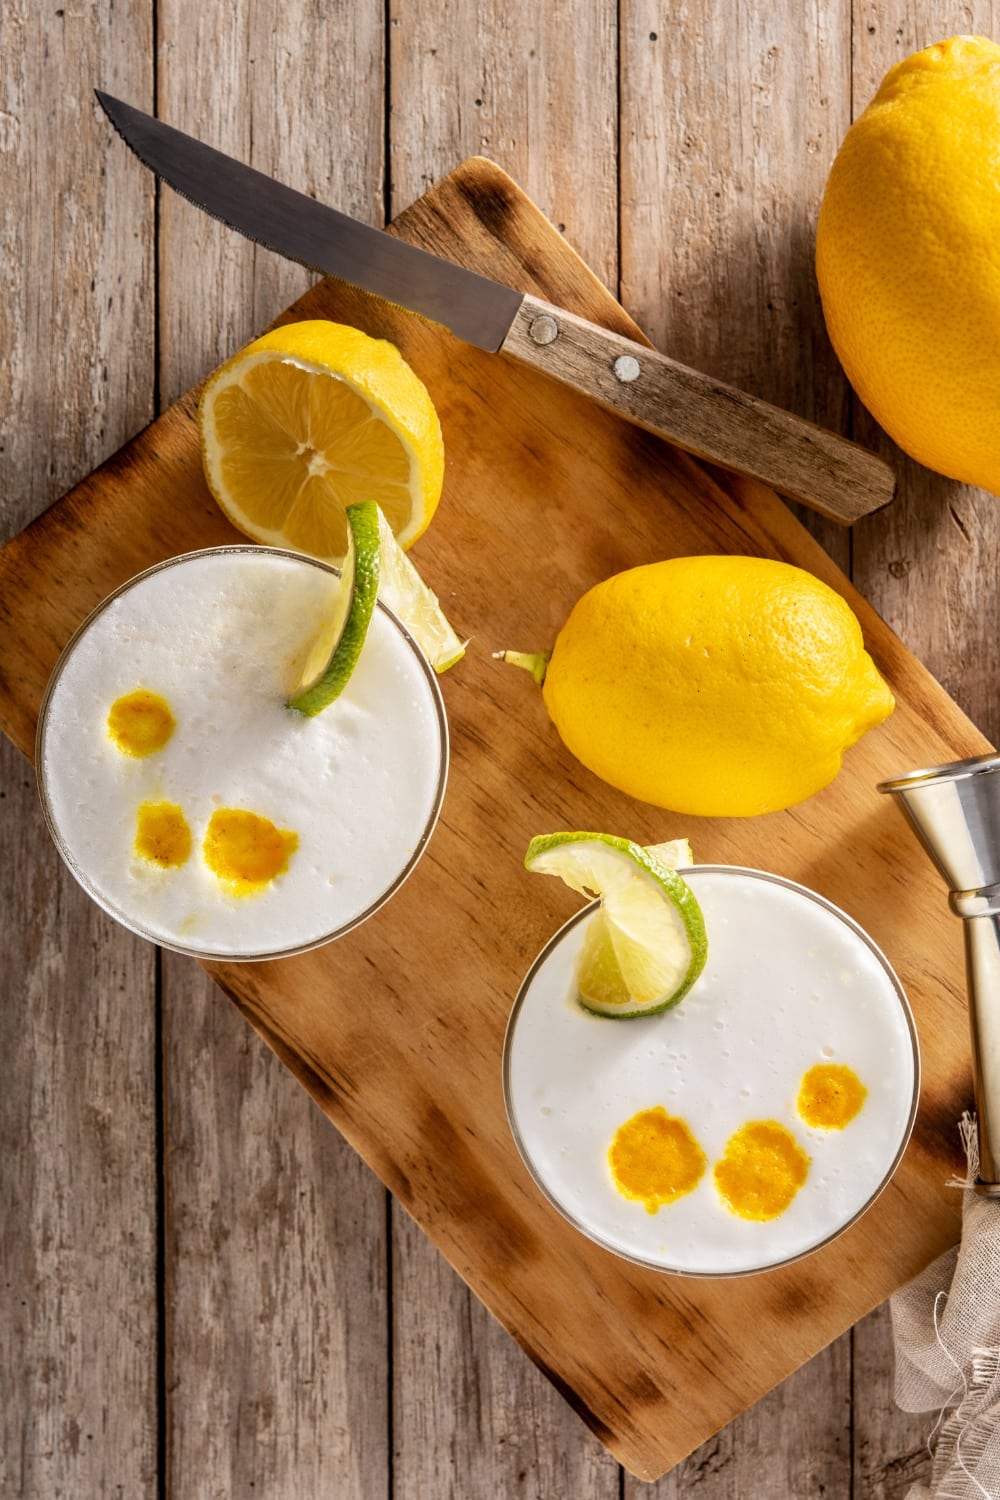 Two Glasses of Foamy Pisco Sour Top View on a Wooden Cutting Board with Lemons, a Knife, and a Shot Measurer